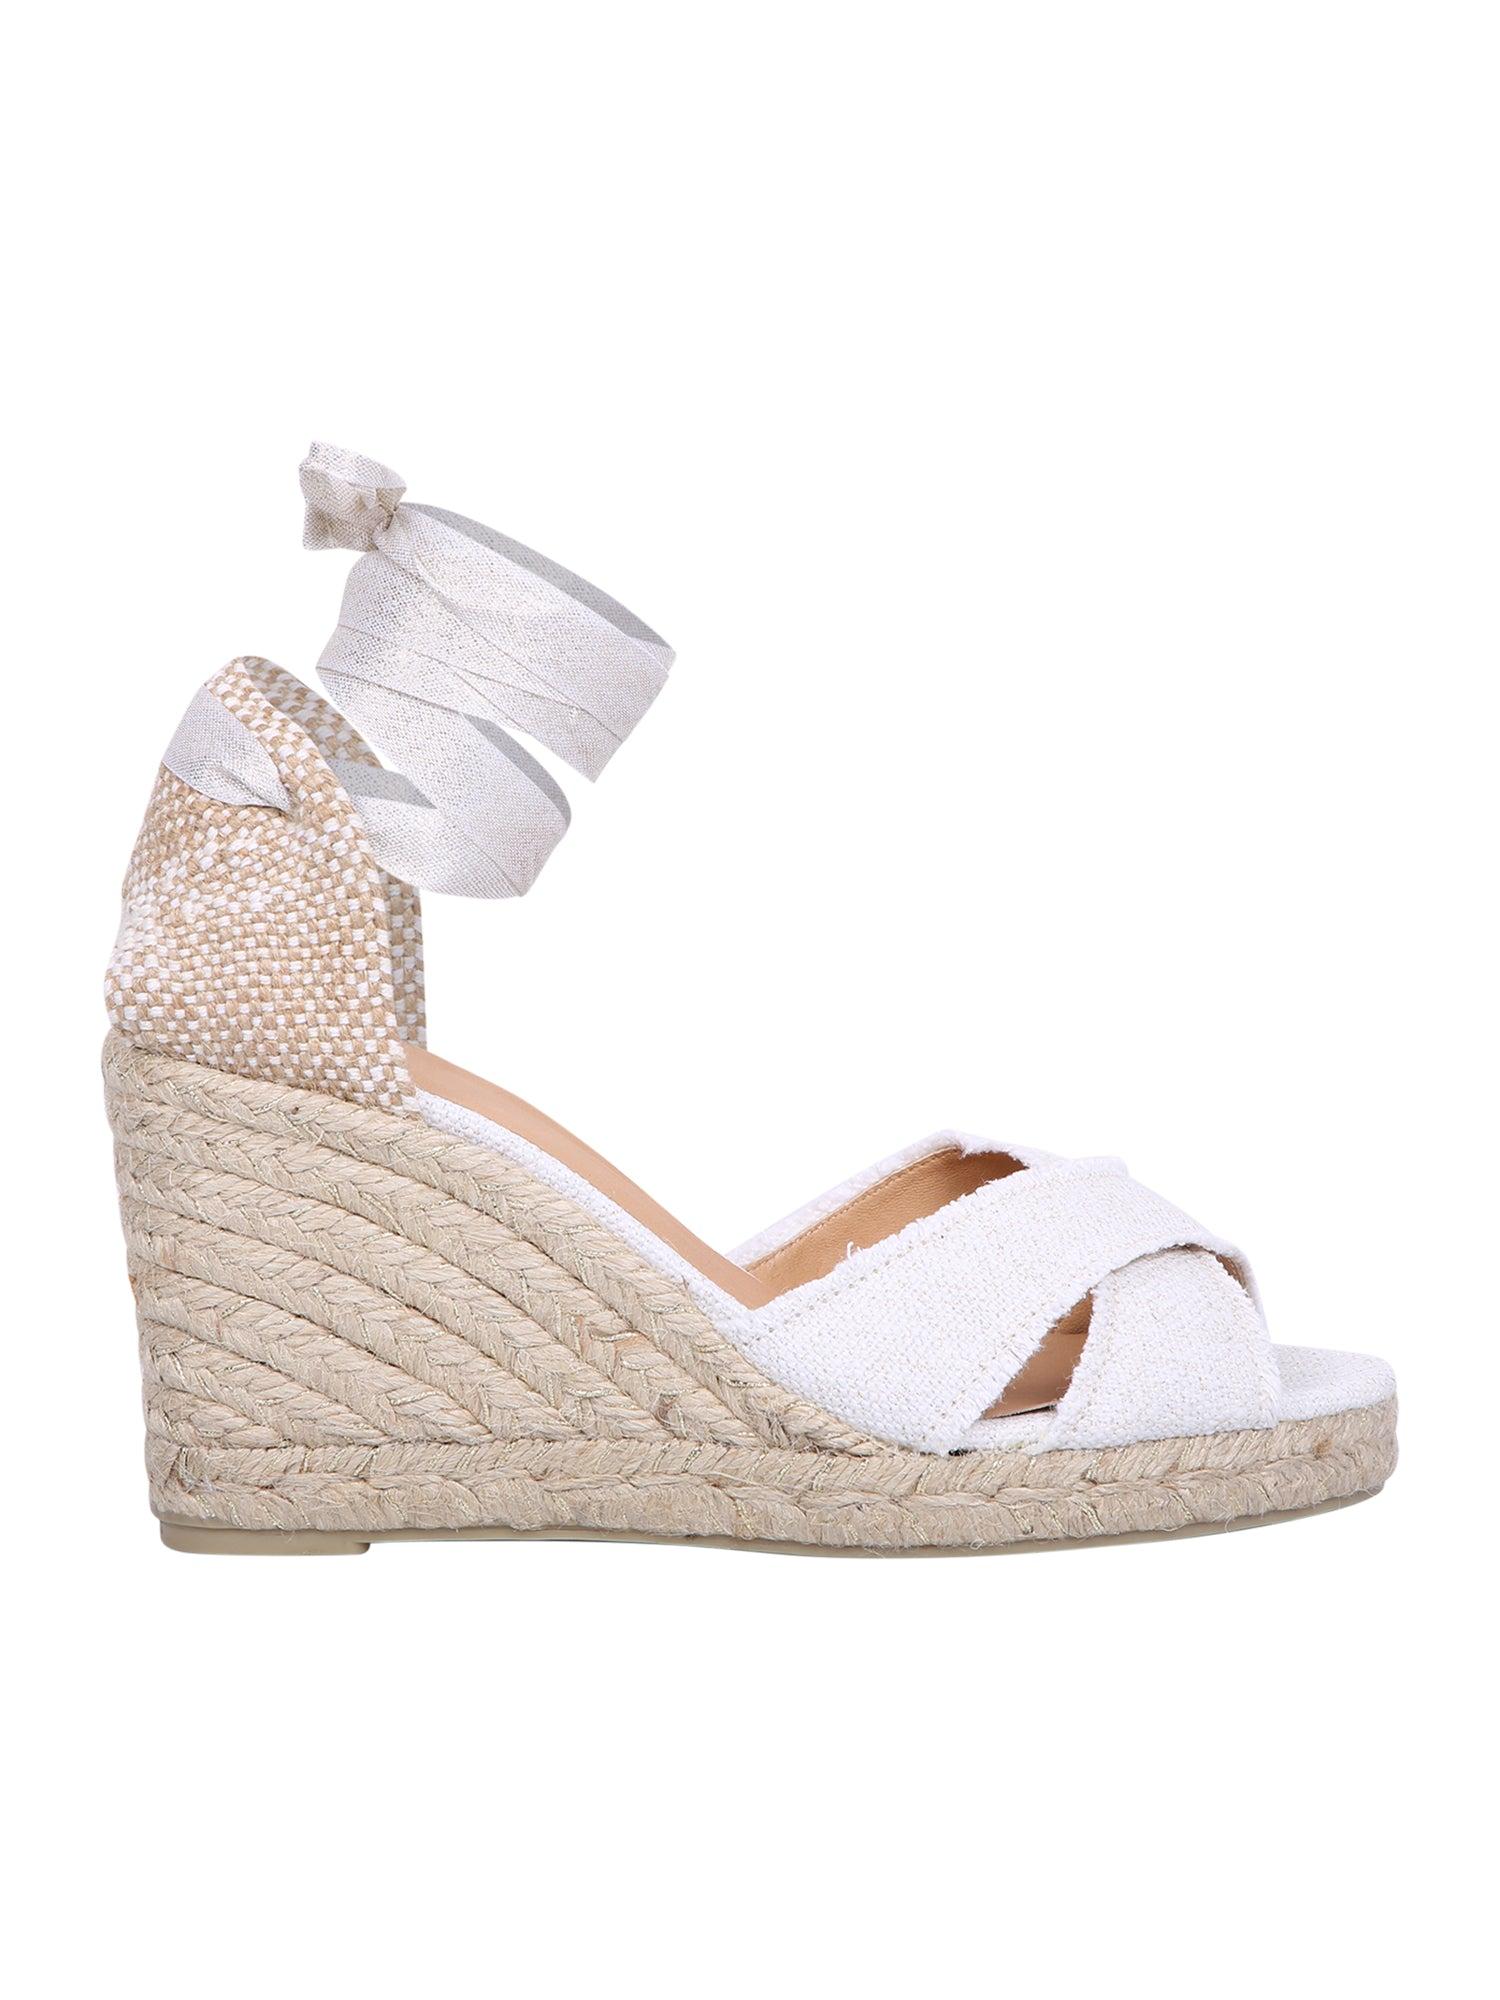 Save 24% Hogan Leather Sandal White in Natural Womens Shoes Heels Wedge sandals 